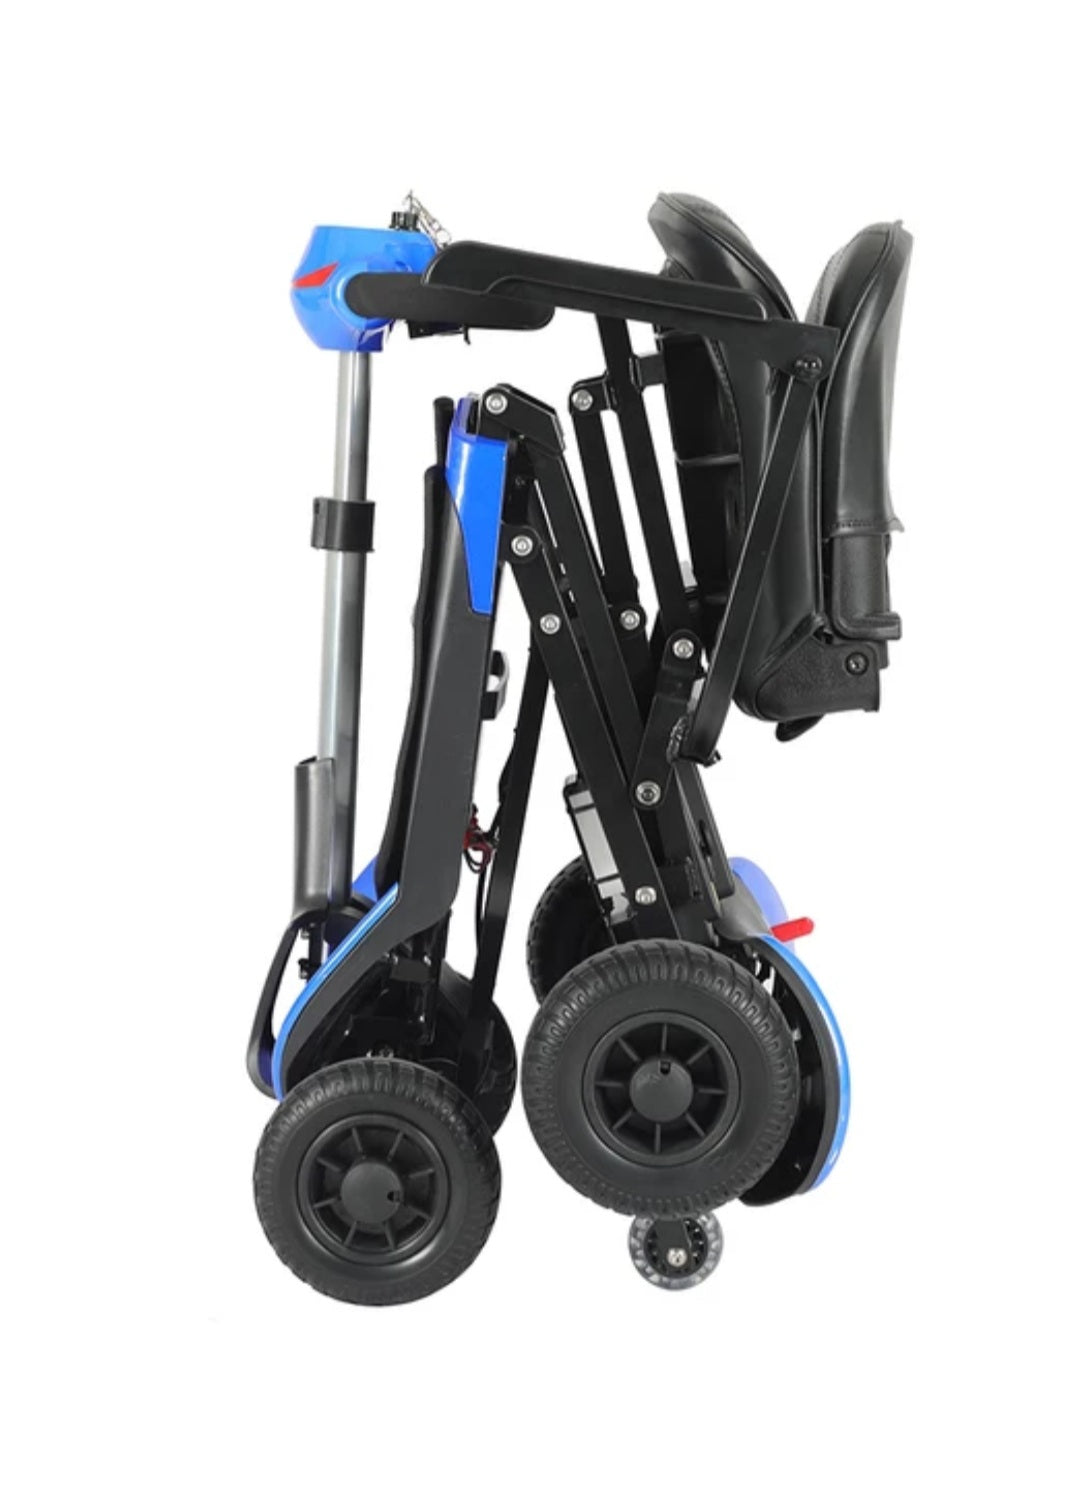 Lightweight Folding Scooter for travel